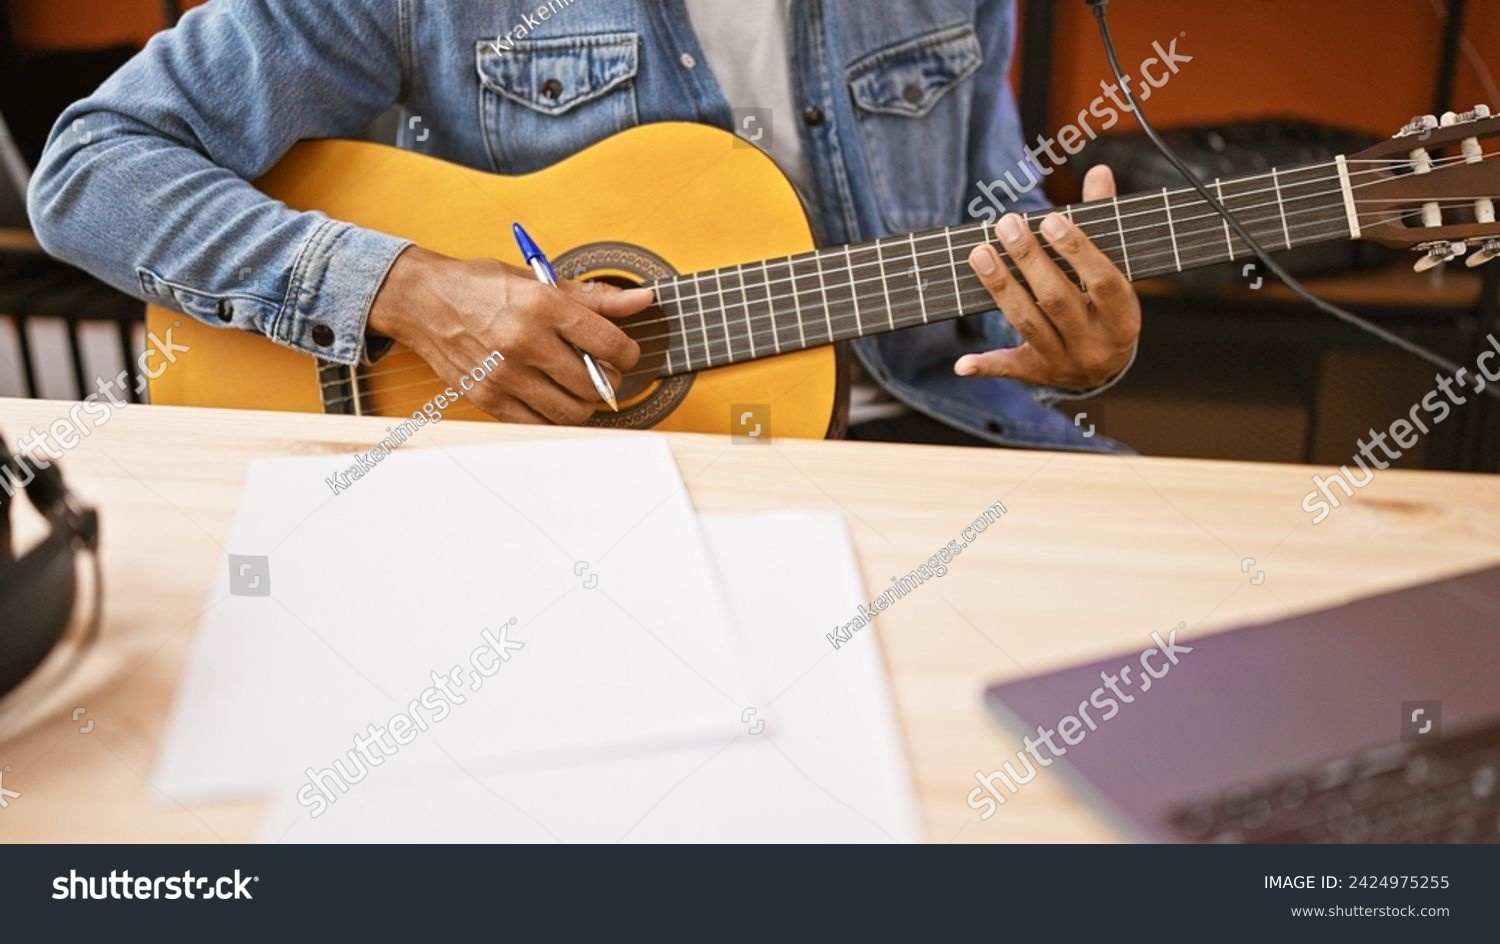 A young man composing music with a guitar in a studio setting, showcasing creativity and artistry. #2424975255